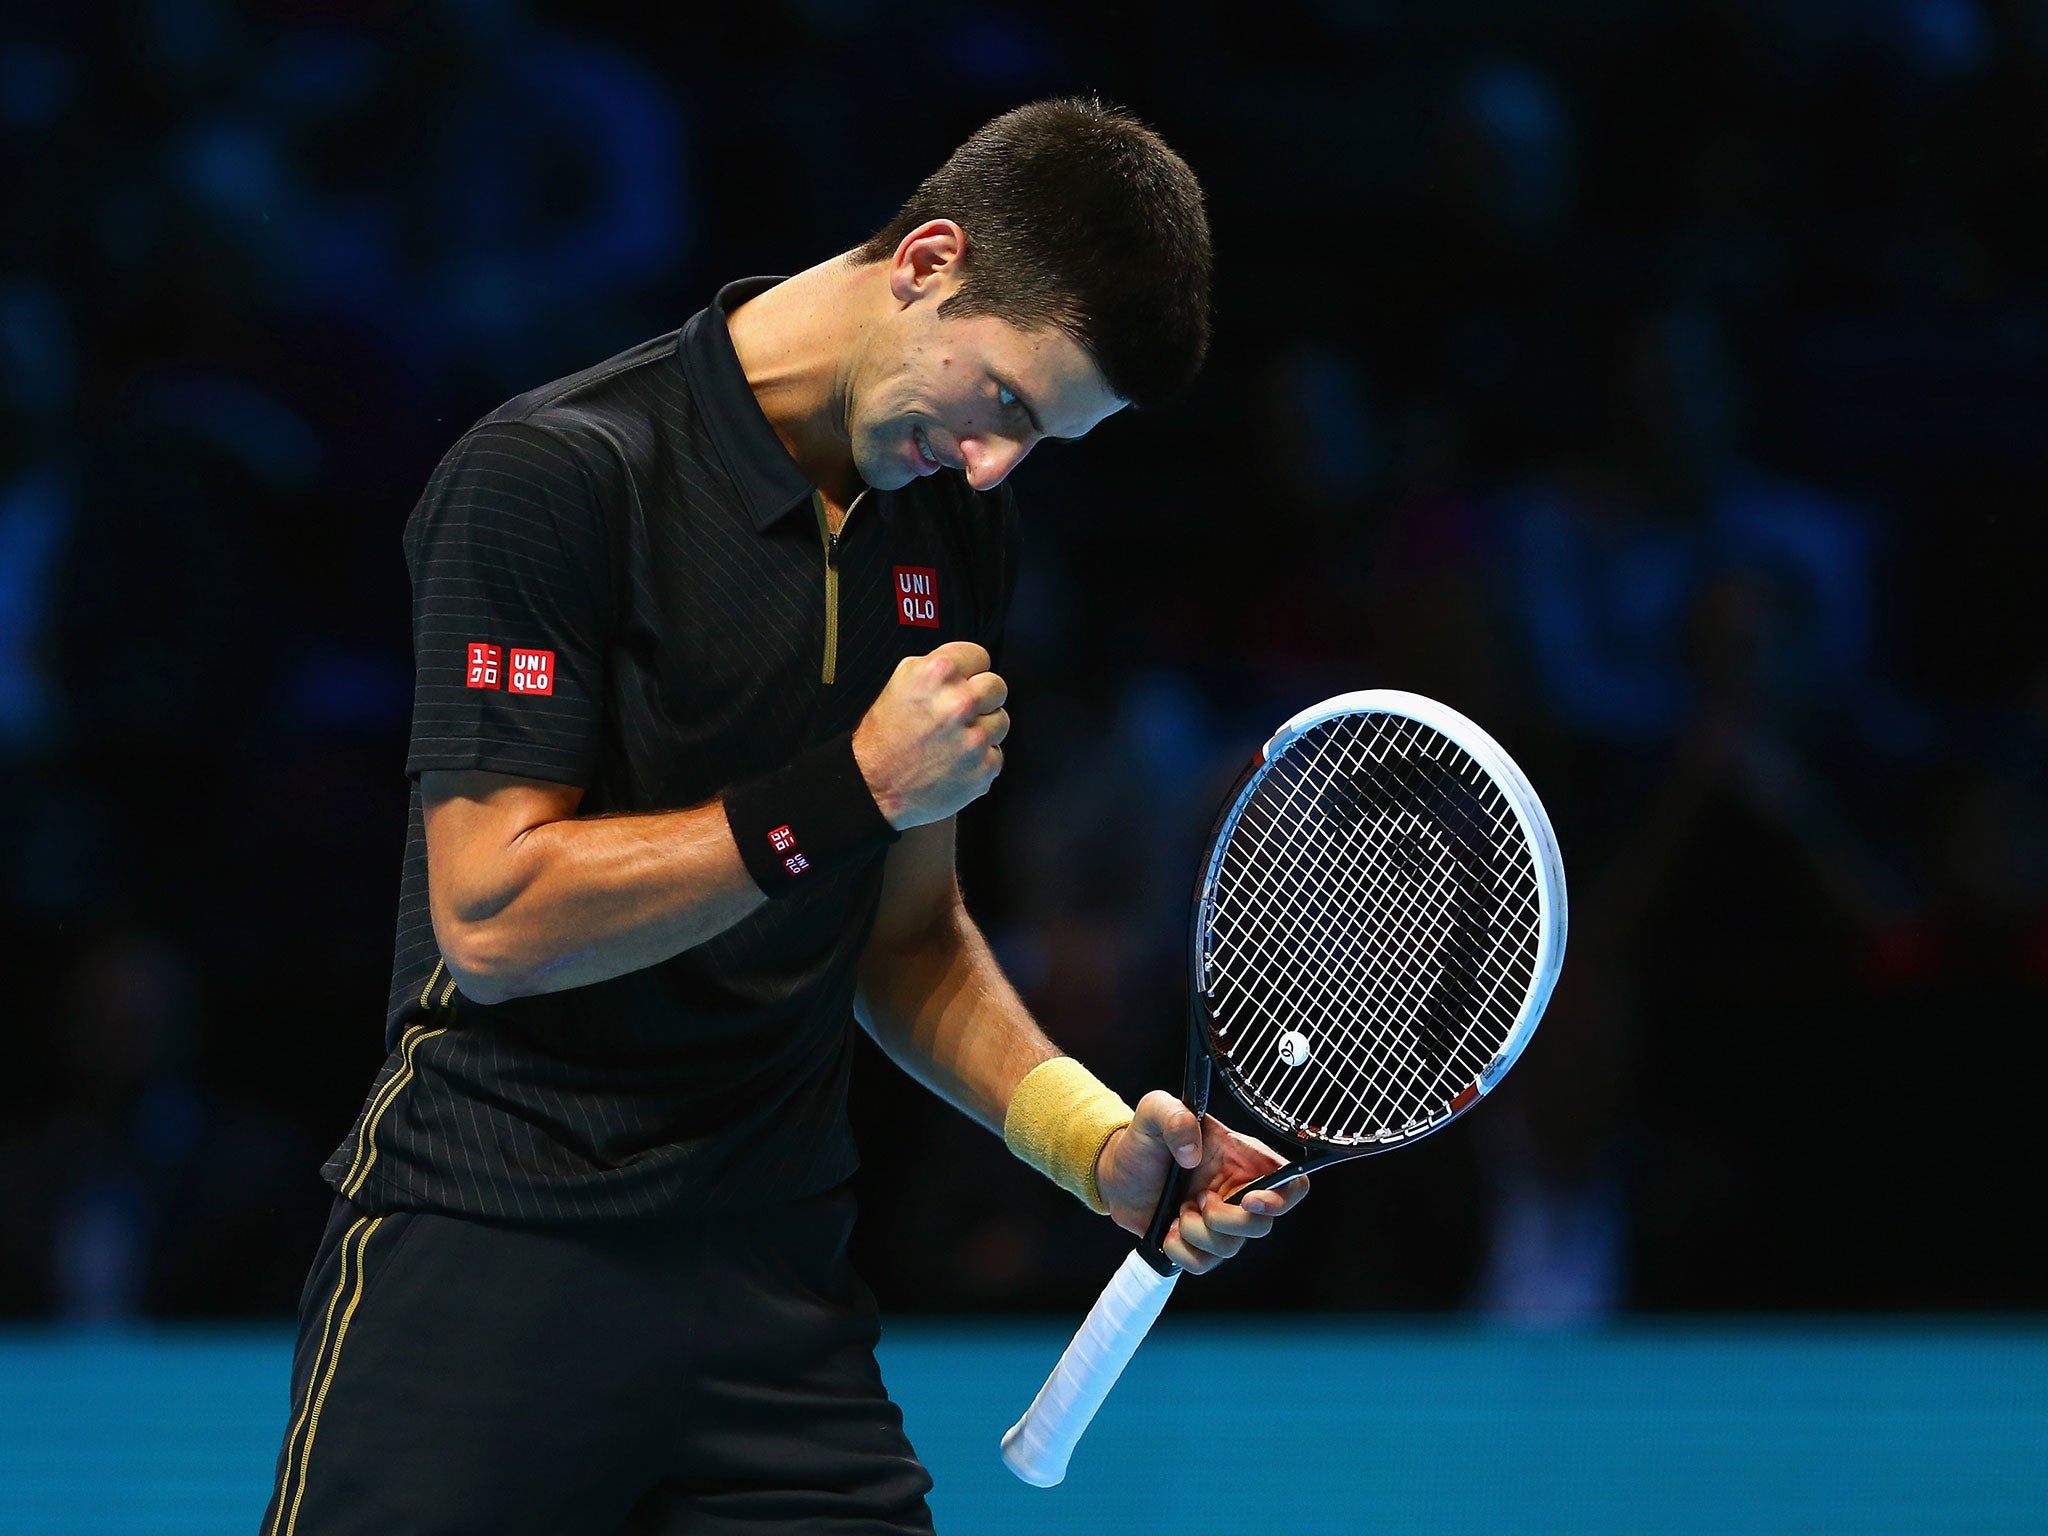 Novak Djokovic in action at the ATP World Tour Finals in London